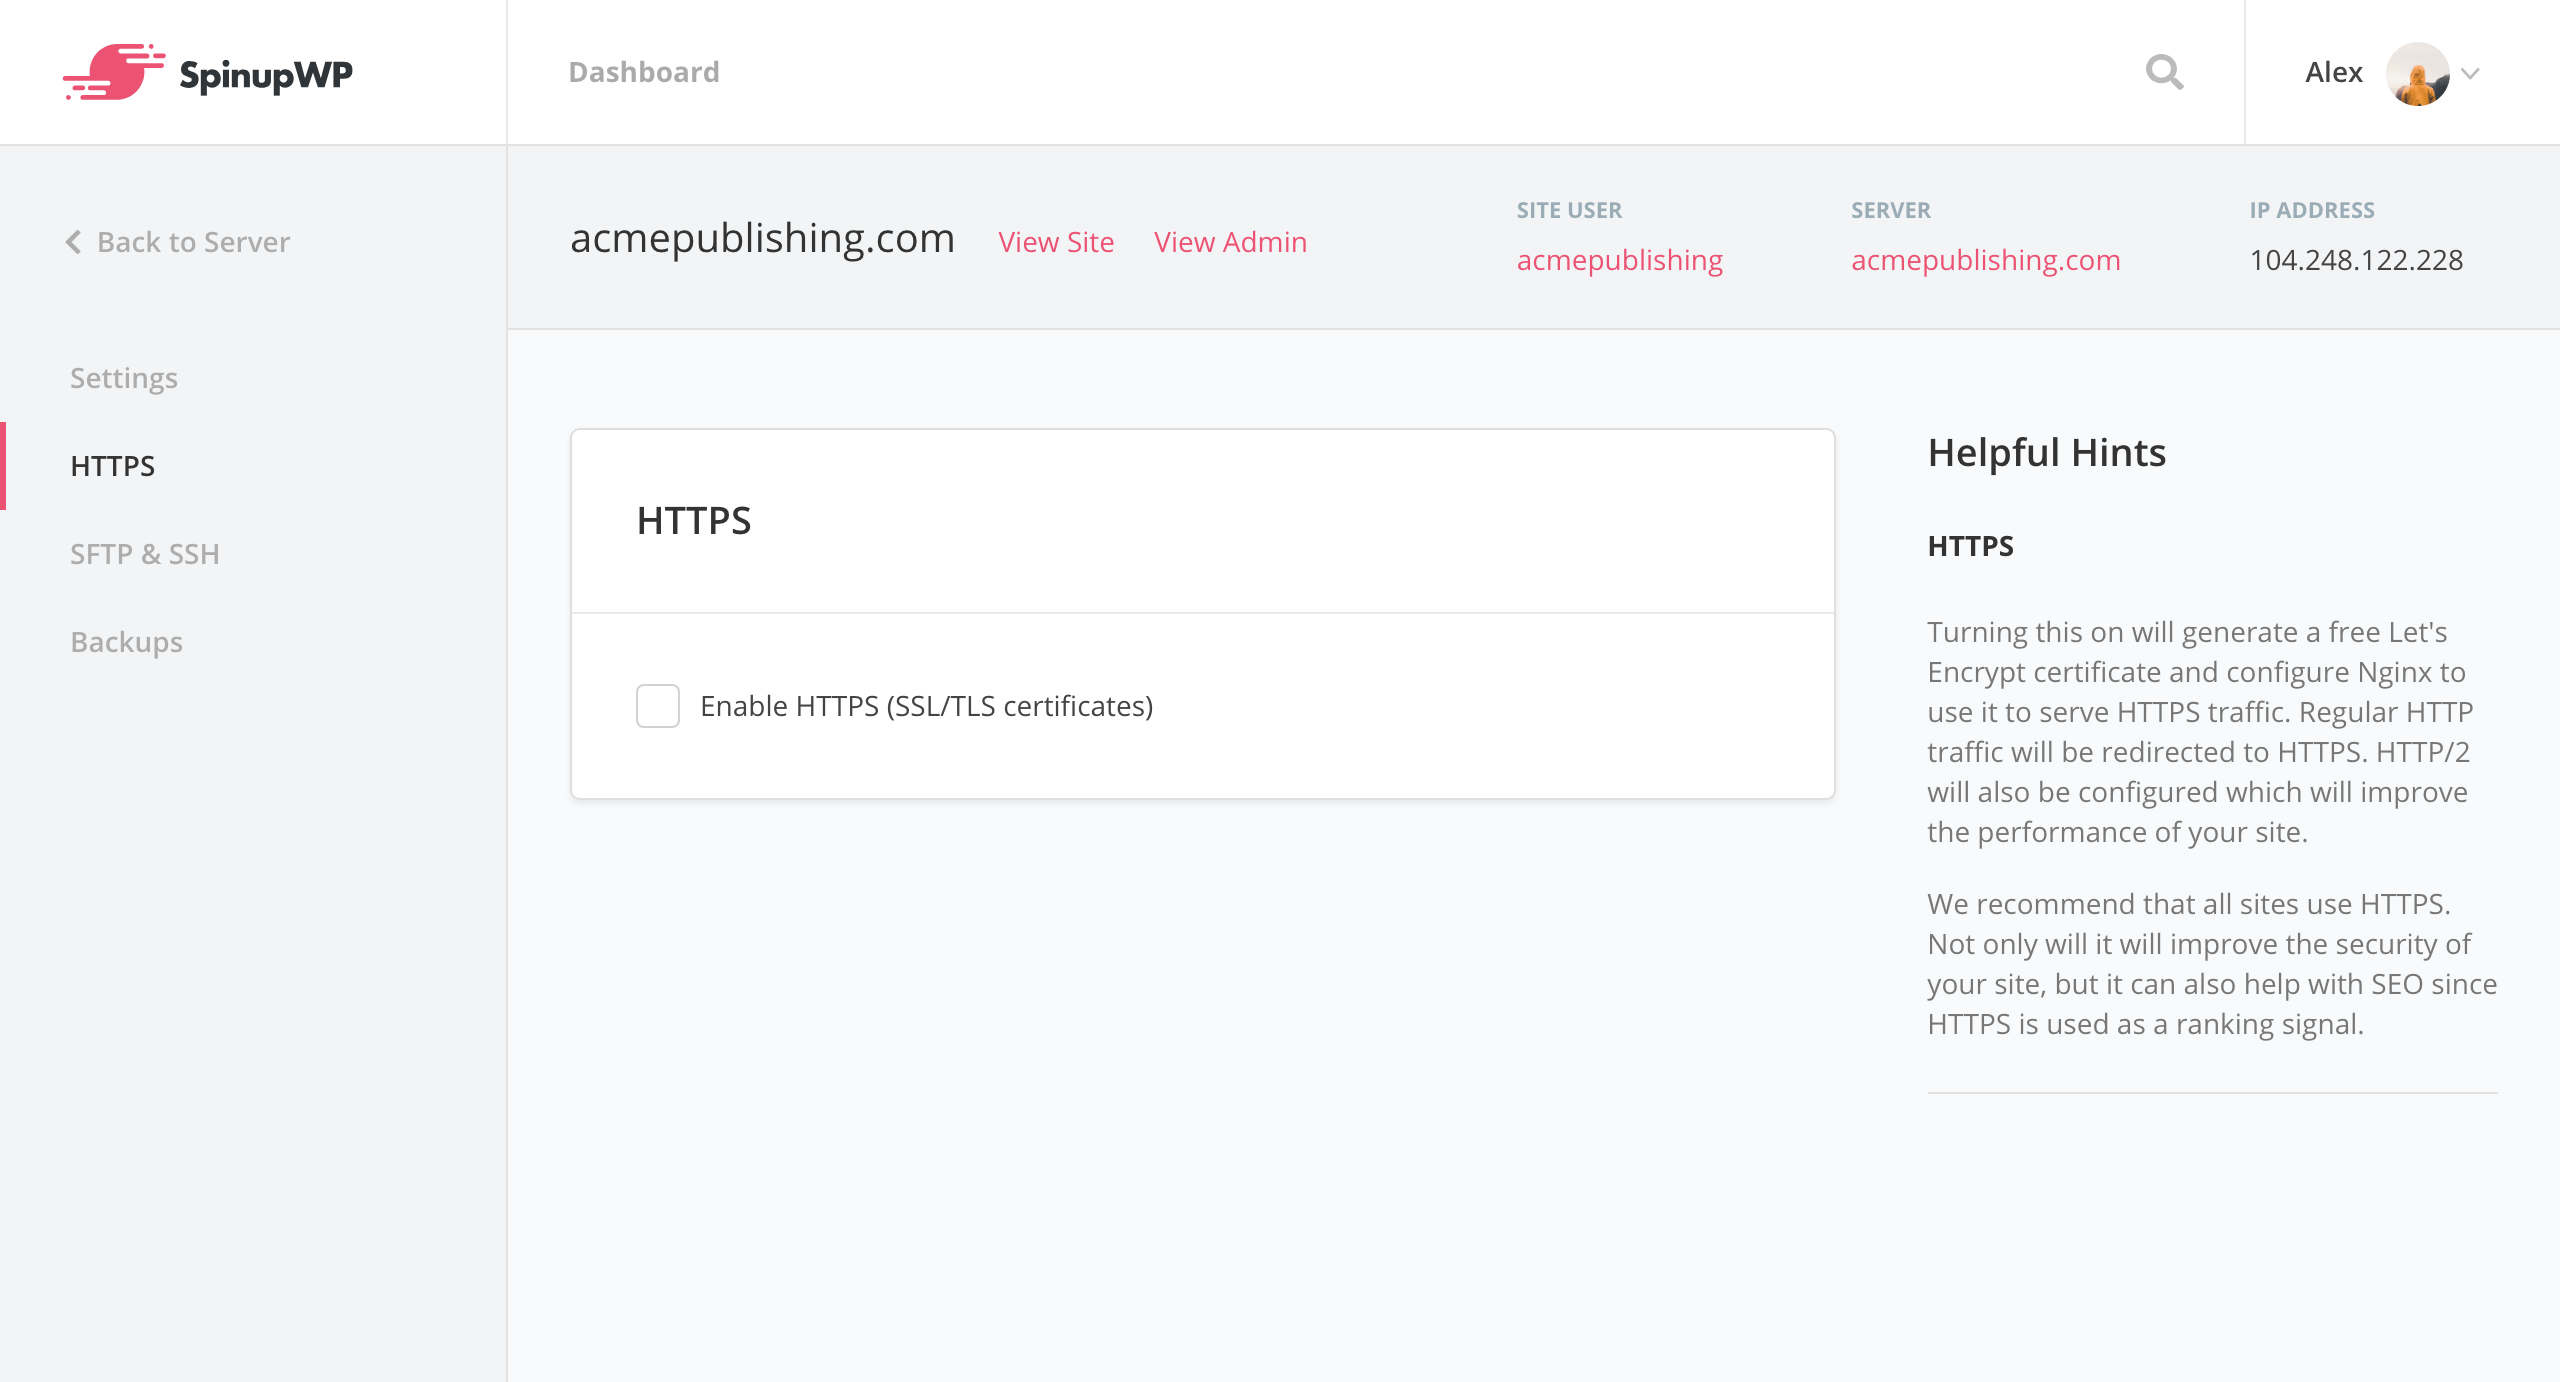 SpinupWP site HTTPS settings